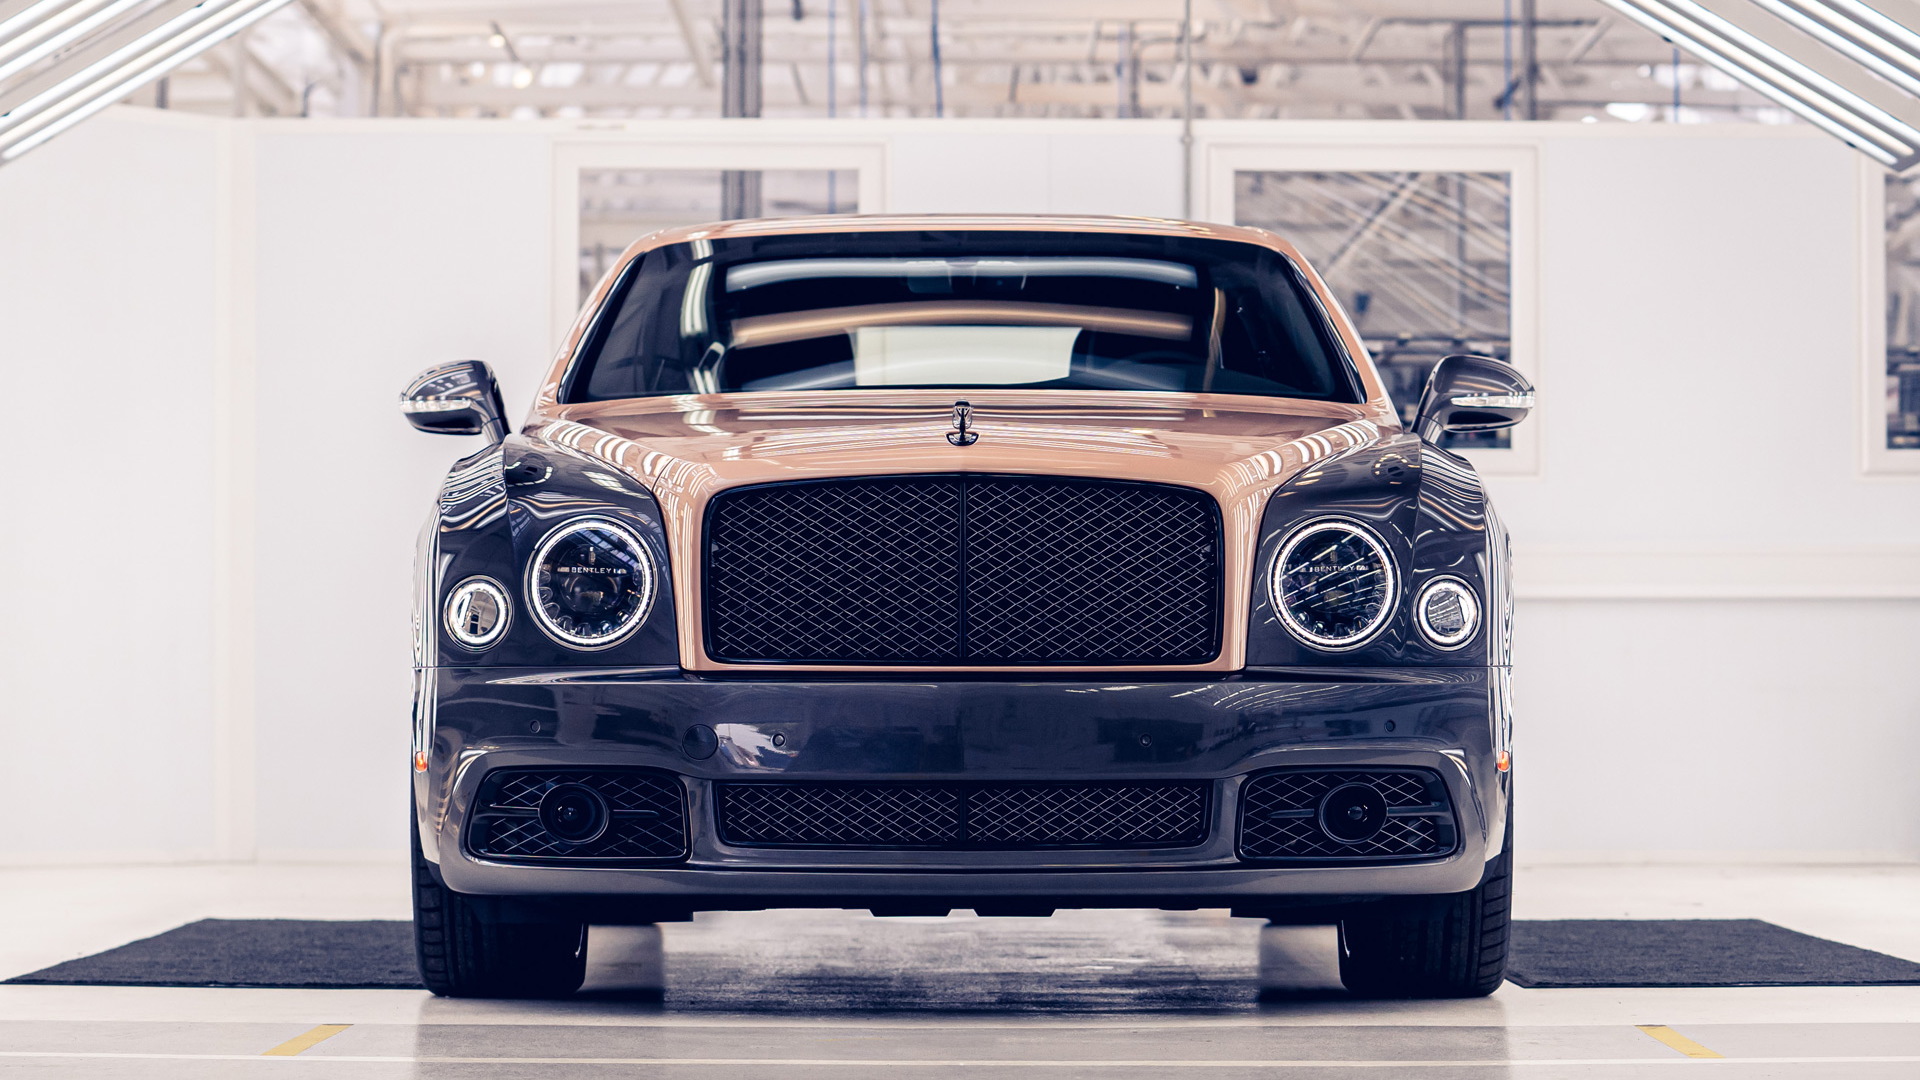 Bentley Mulsanne production comes to an end - June 2020